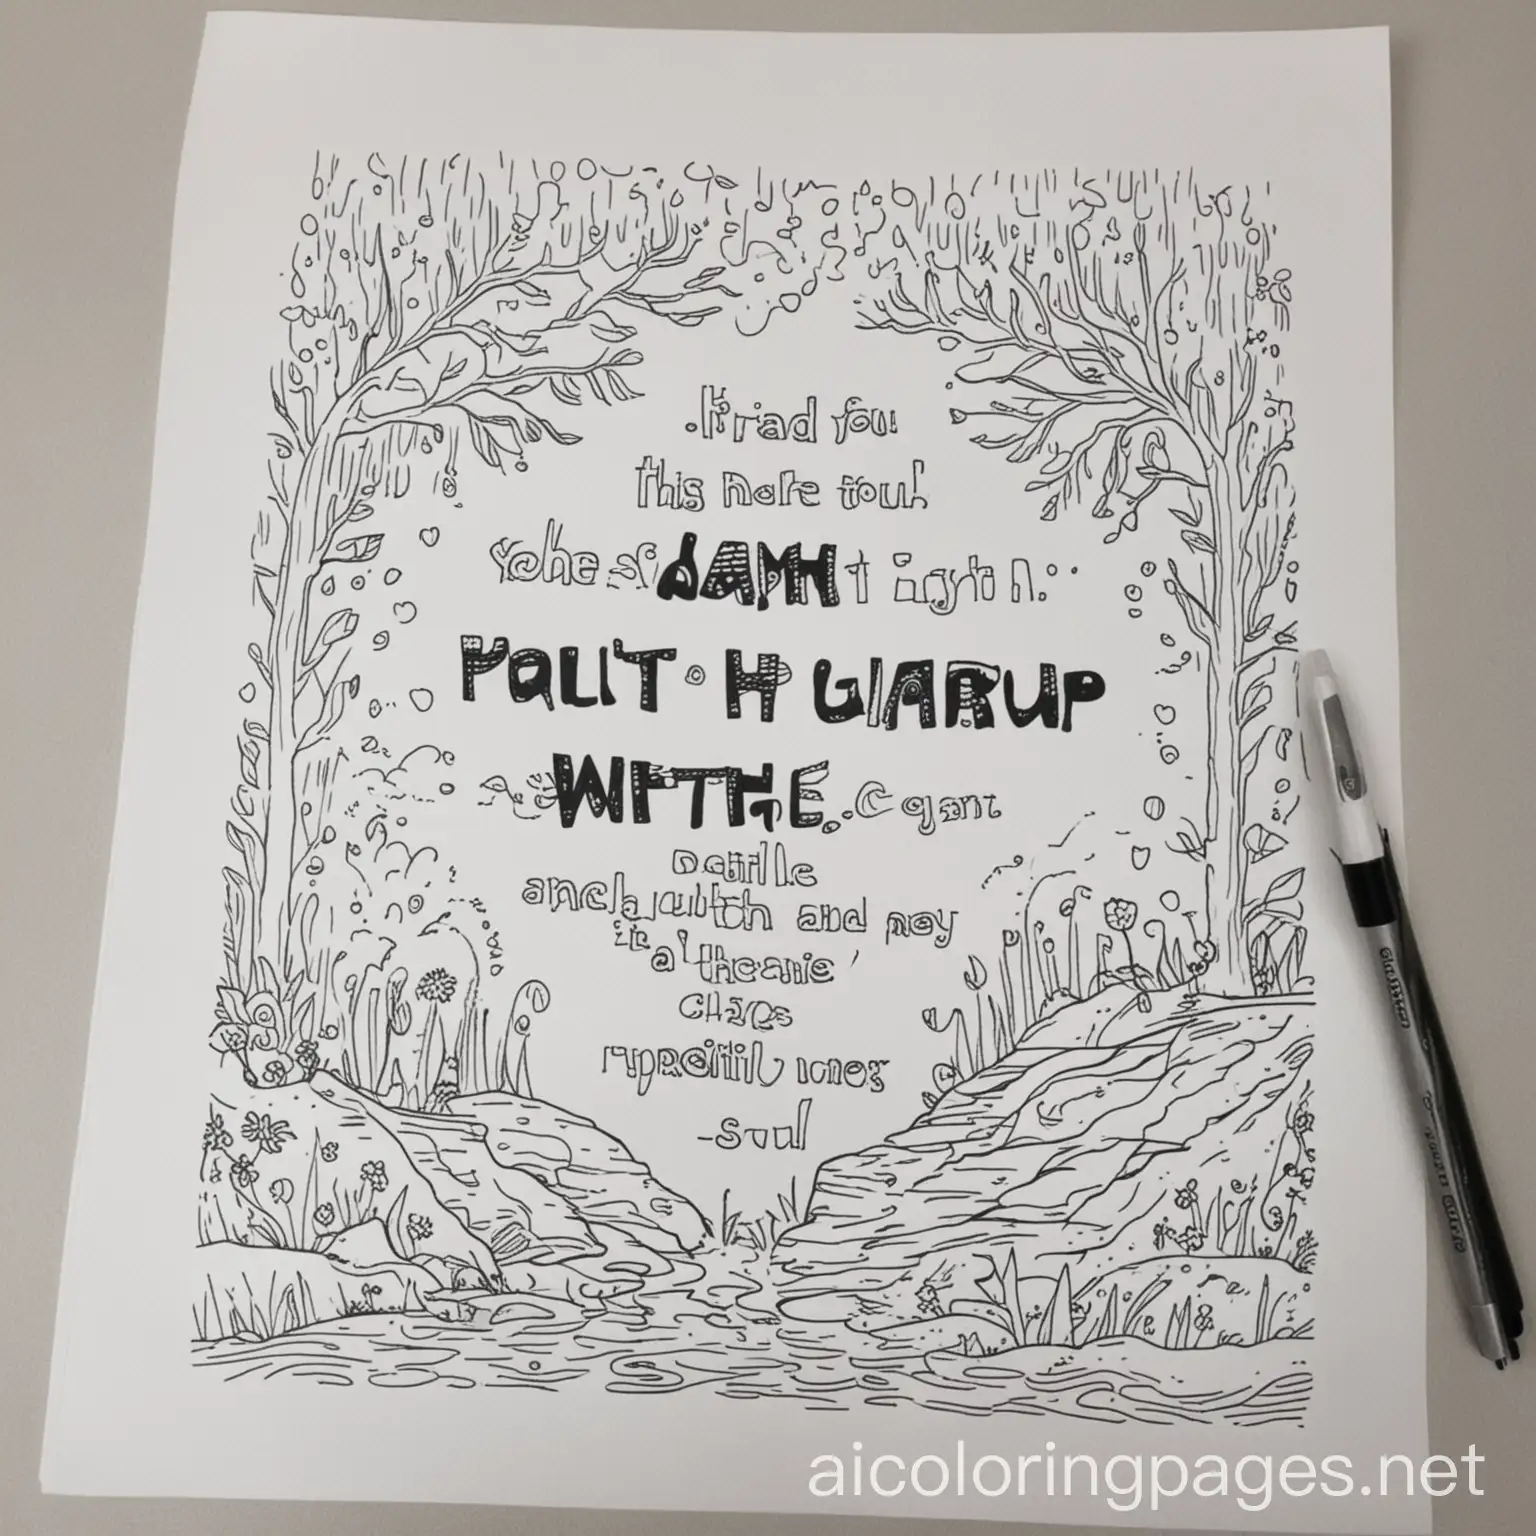 write out text with the verse psalm 42:1 "As the hart panteth after the water brooks, so panteth my soul after thee, O God", Coloring Page, black and white, line art, white background, Simplicity, Ample White Space. The background of the coloring page is plain white to make it easy for young children to color within the lines. The outlines of all the subjects are easy to distinguish, making it simple for kids to color without too much difficulty